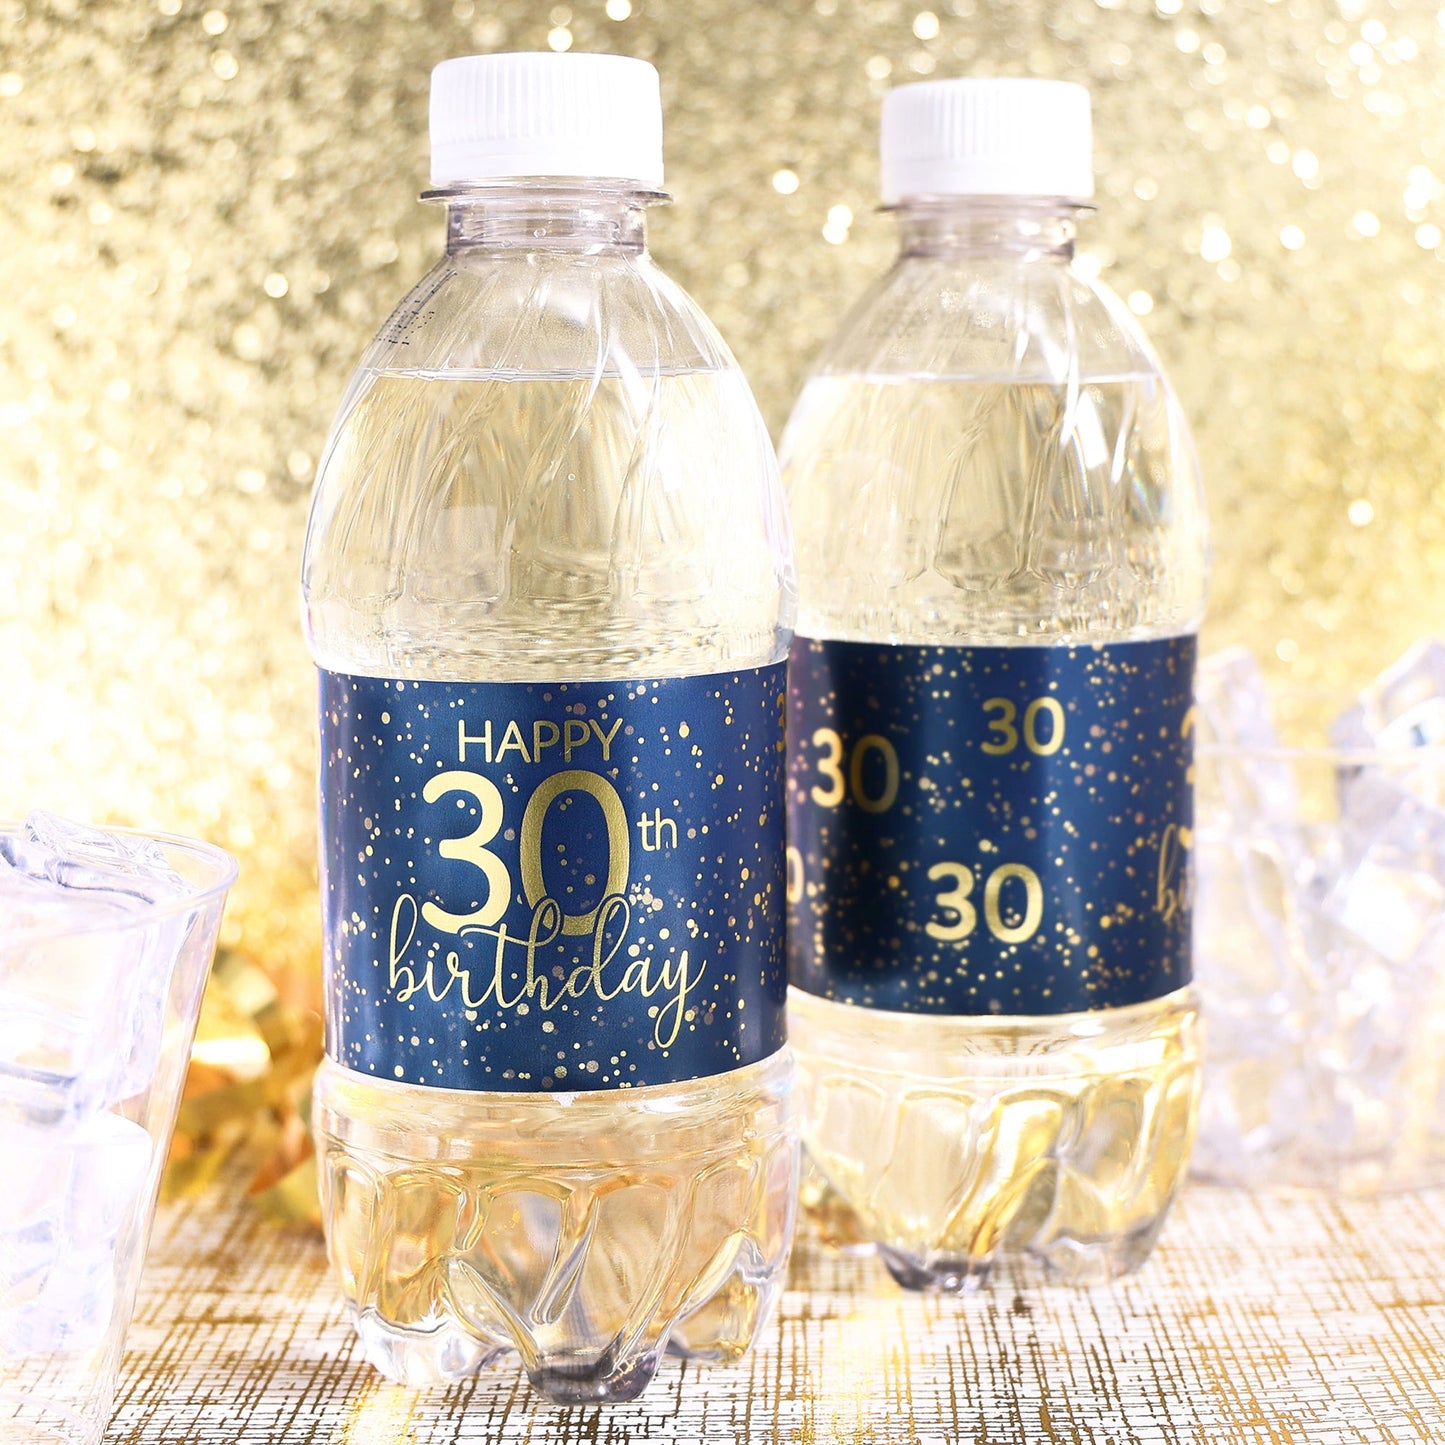 A close-up view of a navy blue water bottle label with gold lettering that reads "Happy 30th Birthday" and features a sleek, modern design.